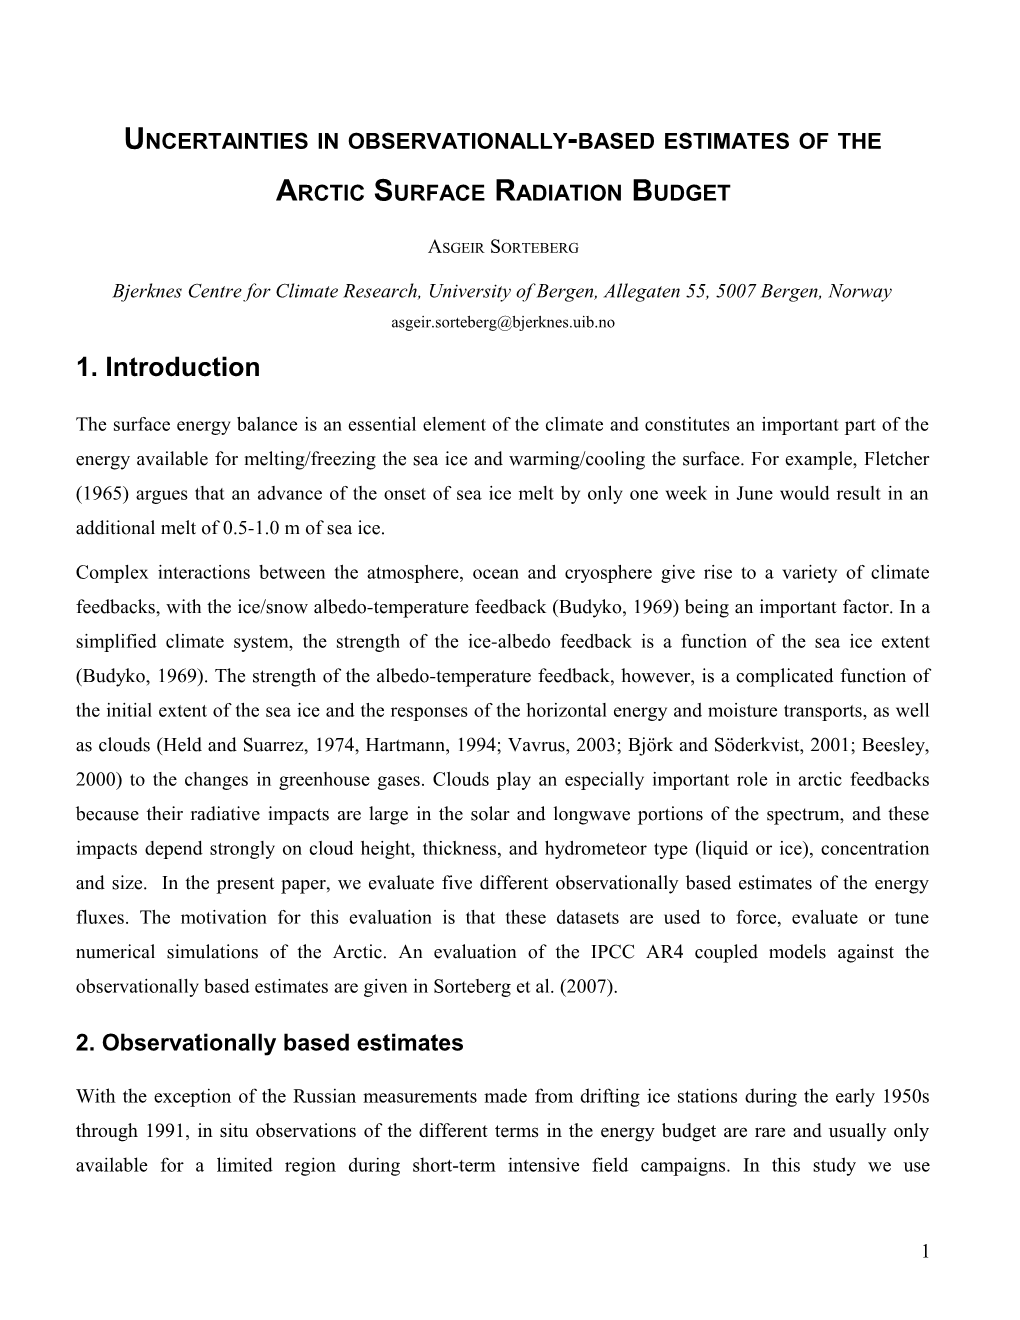 The Arctic Surface Energy Budget As Simulated with the IPCC AR4 Aogcms